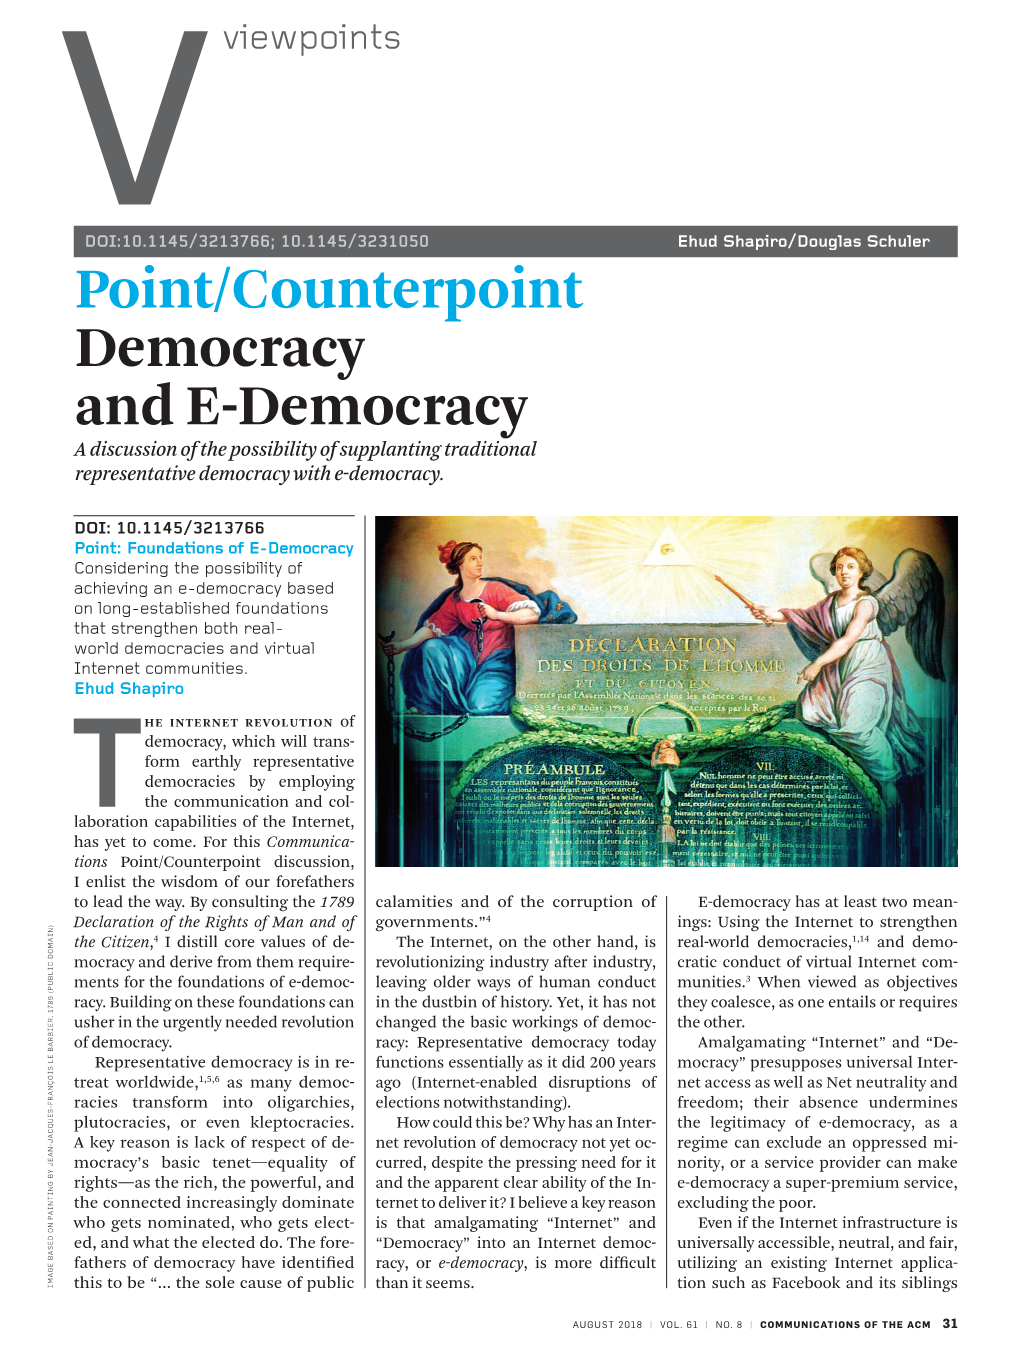 E-Democracy a Discussion of the Possibility of Supplanting Traditional Representative Democracy with E-Democracy